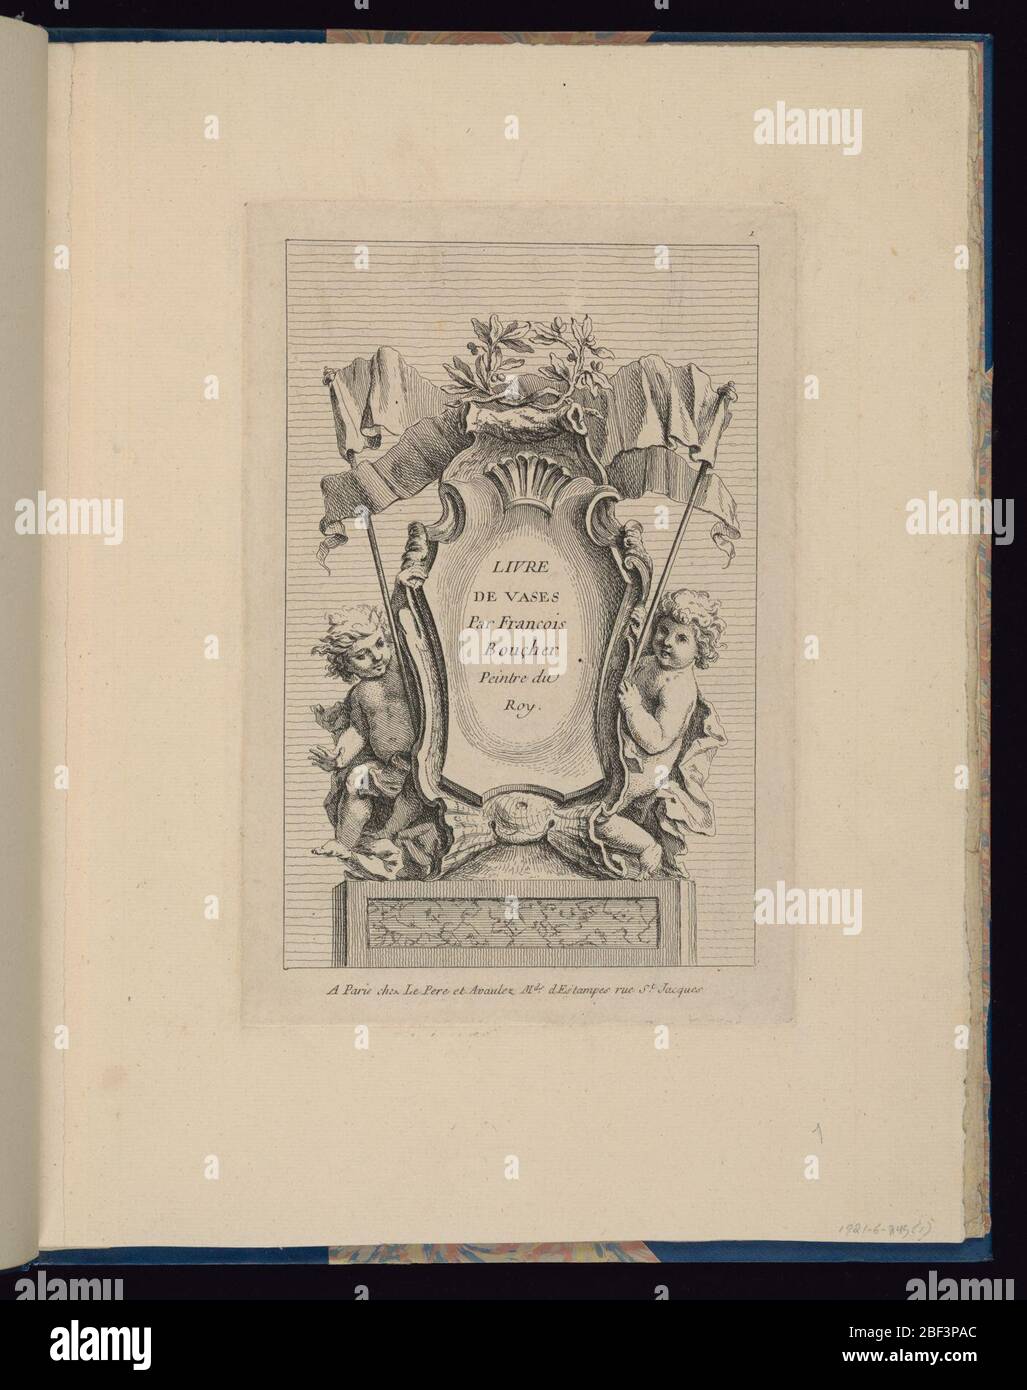 Plate 1 Title Plate Livre de vases Book of Vases. At center, a cartouche surrounded by putti at left and right, each holding the support of a banner at top. Above the escutcheon, a crown of laurel leaves. Stock Photo